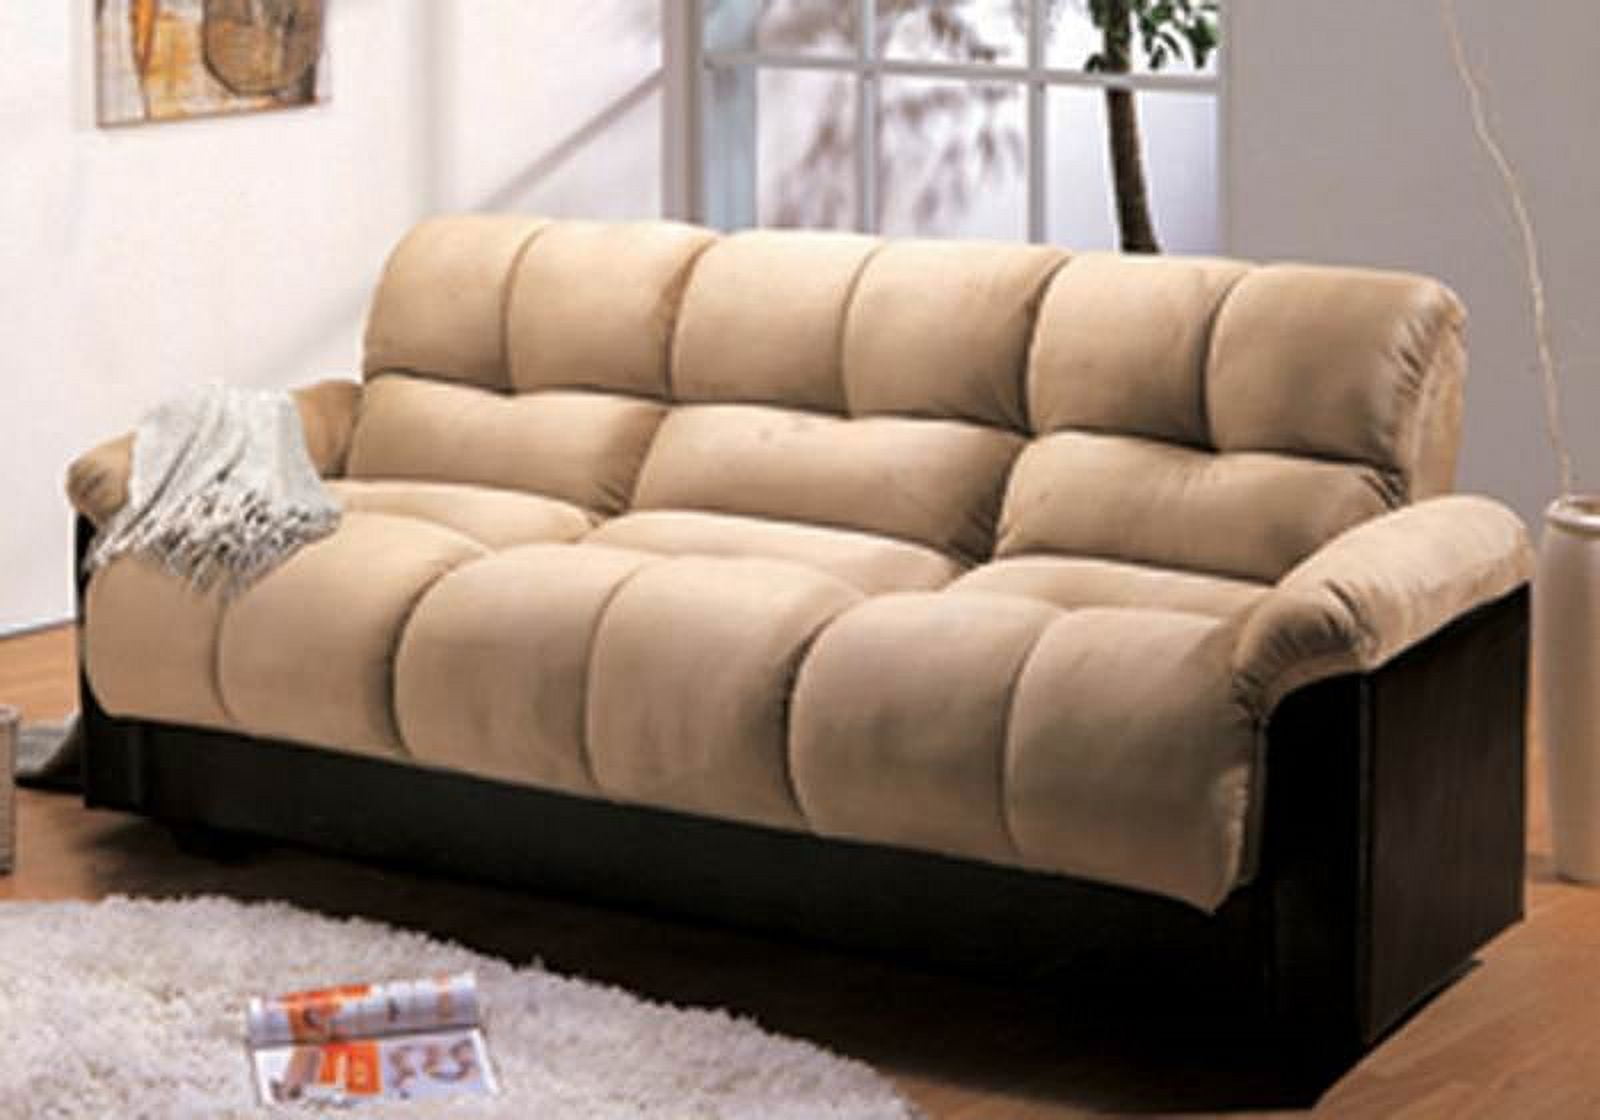 Milton Green Star London Sofa Bed With